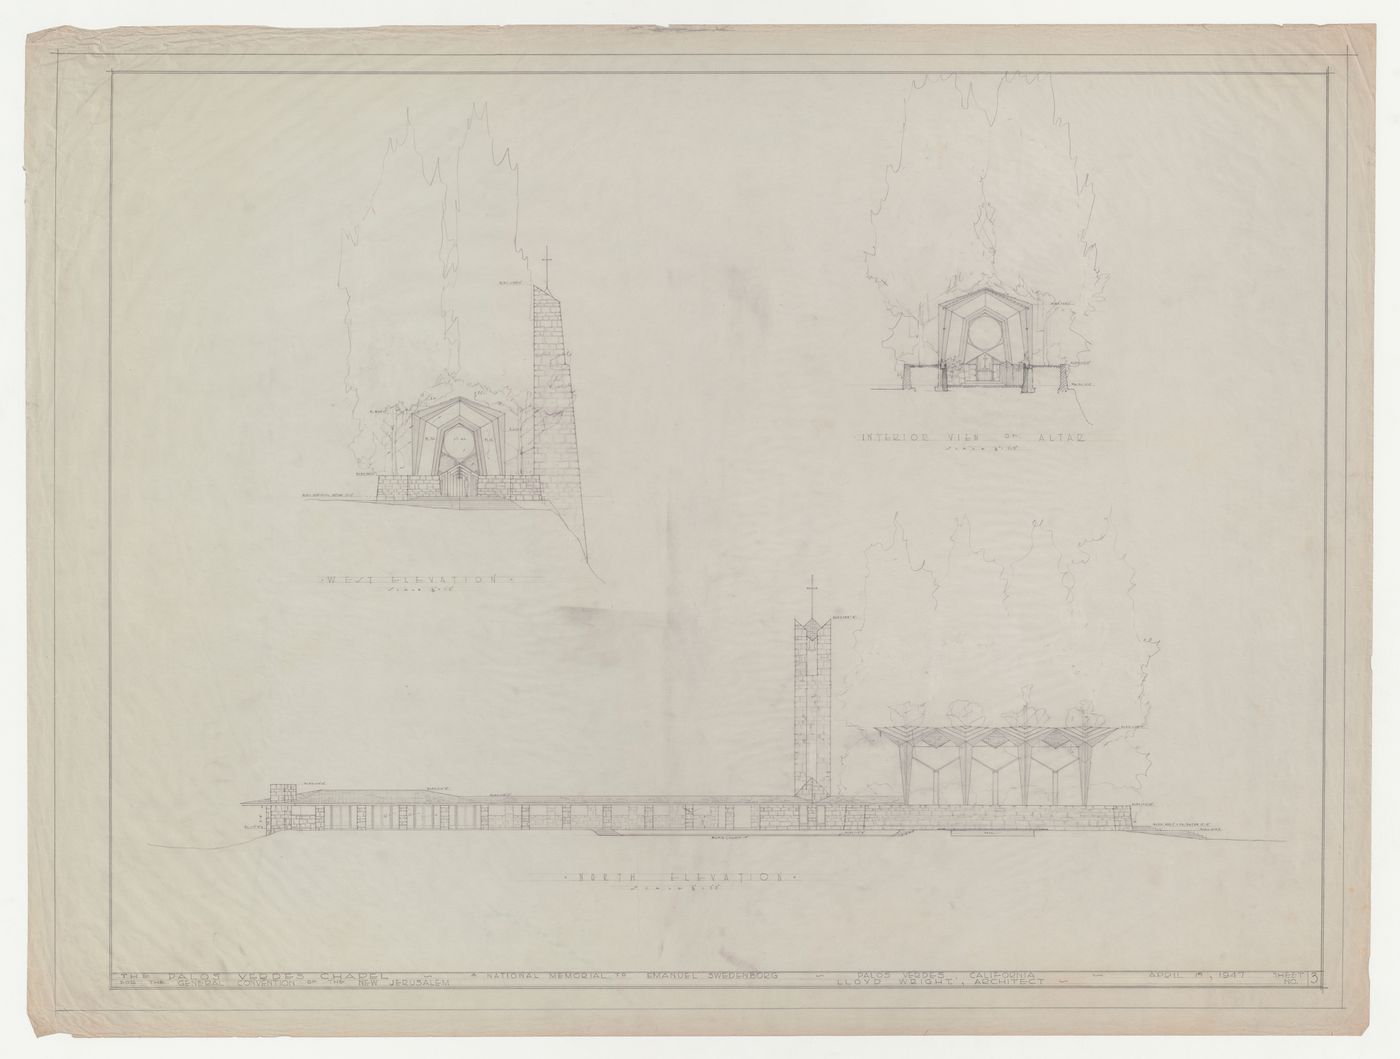 Wayfarers' Chapel, Palos Verdes, California: West and north elevations for chapel, vestry, campanile, cloister, and parish house, and cross section through the chapel looking towards the altar